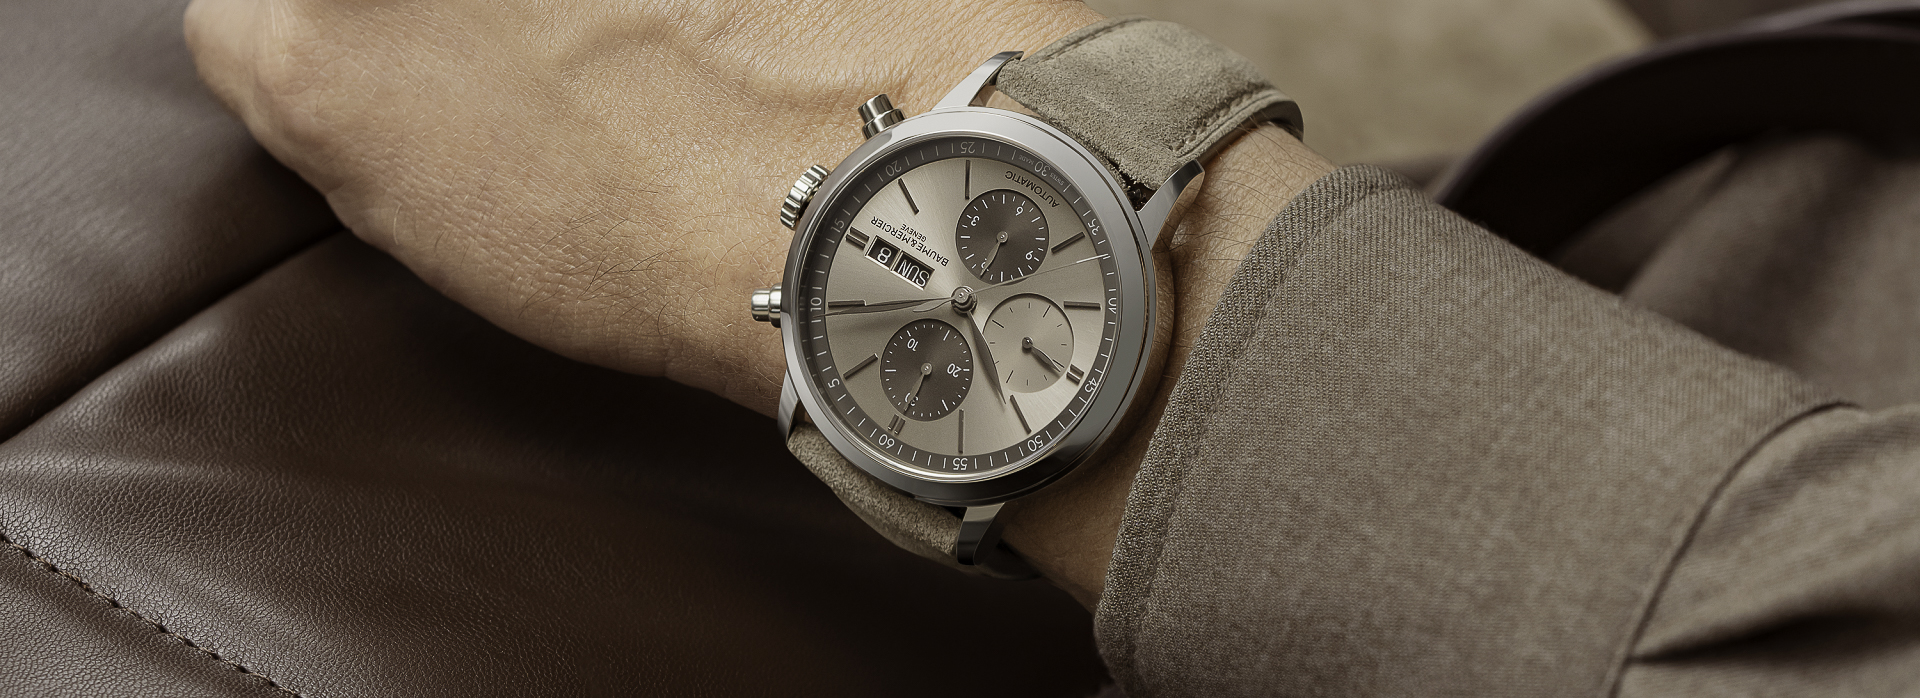 New Chronographs for the Baume & Mercier Classima